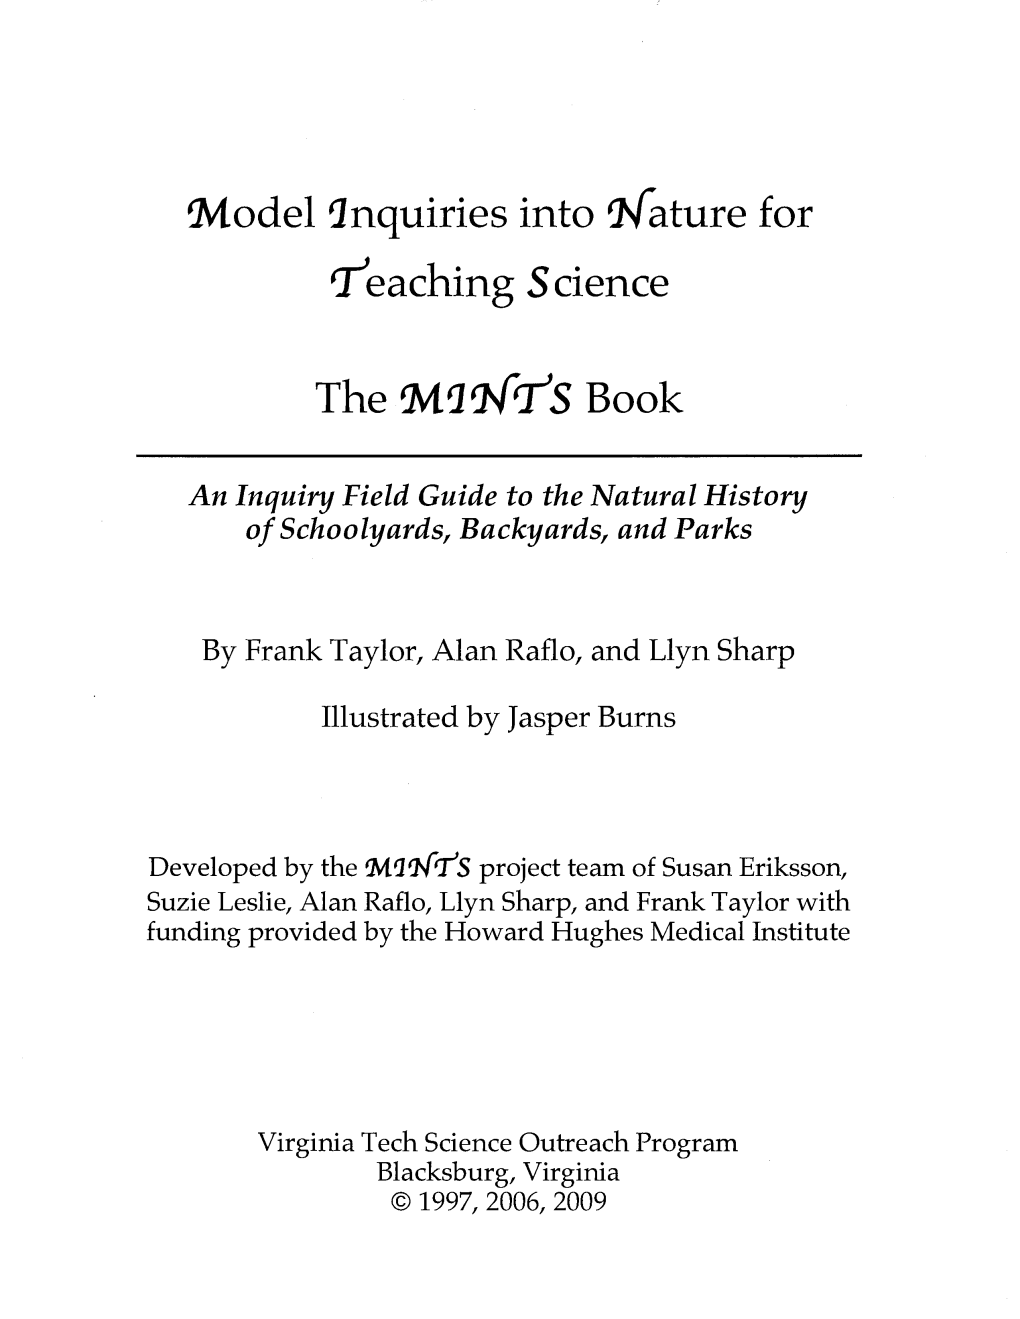 The MINTS Book (Model Inquiries Into Nature for Teaching Science)